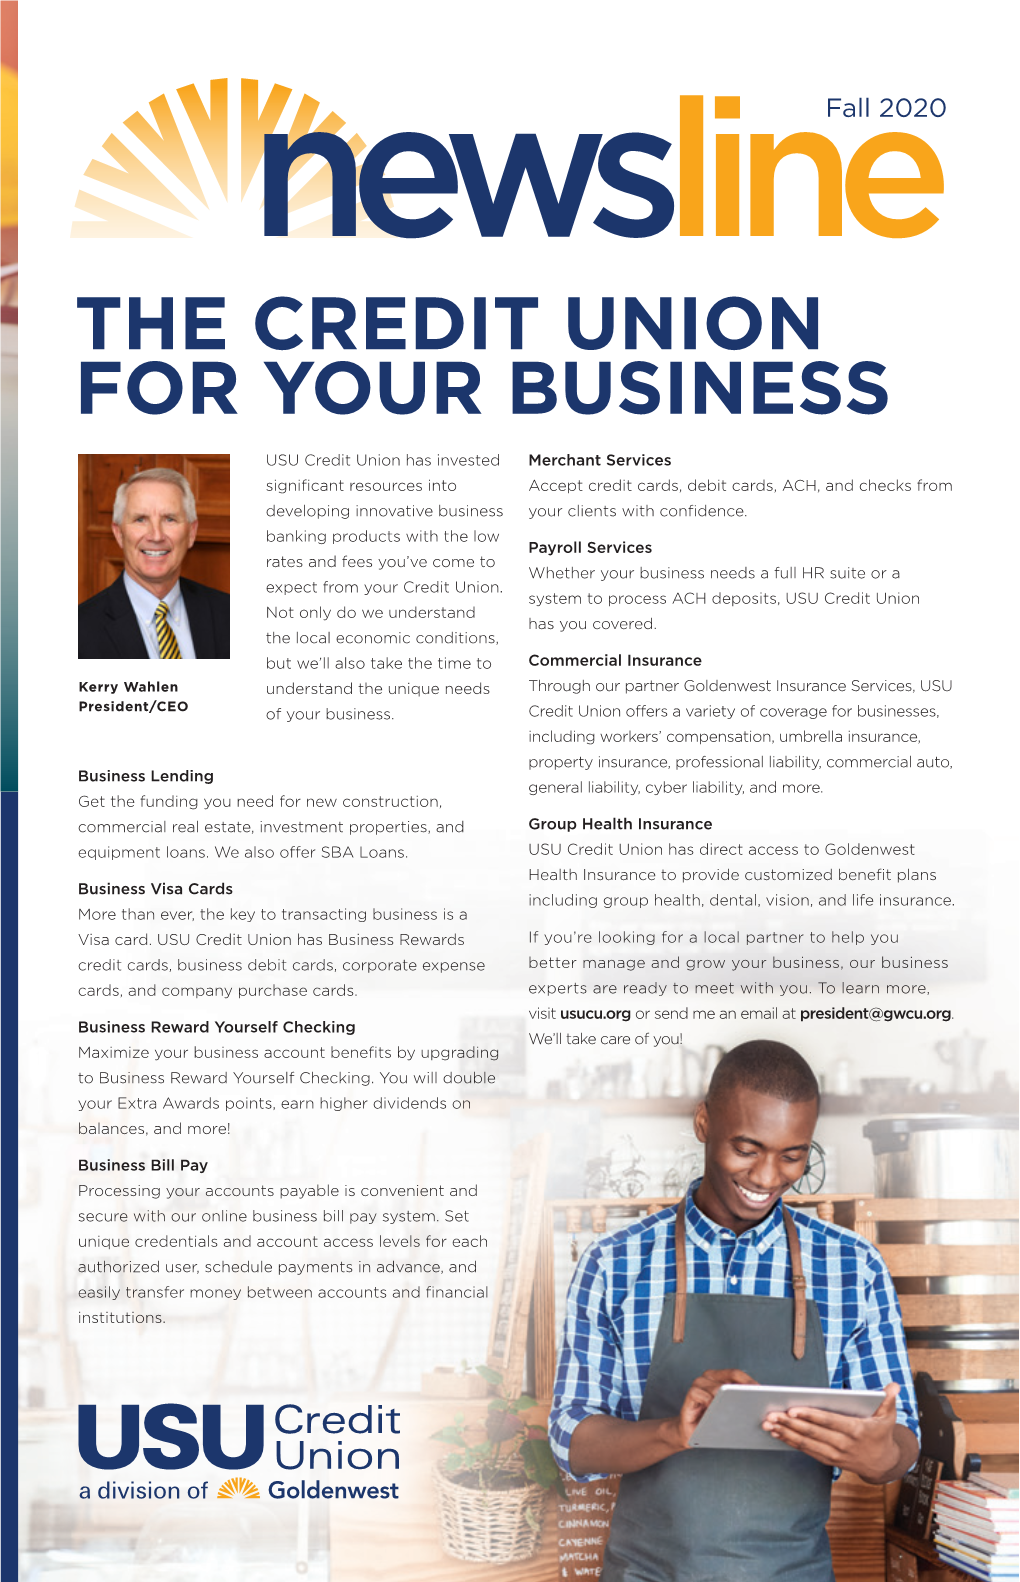 The Credit Union for Your Business